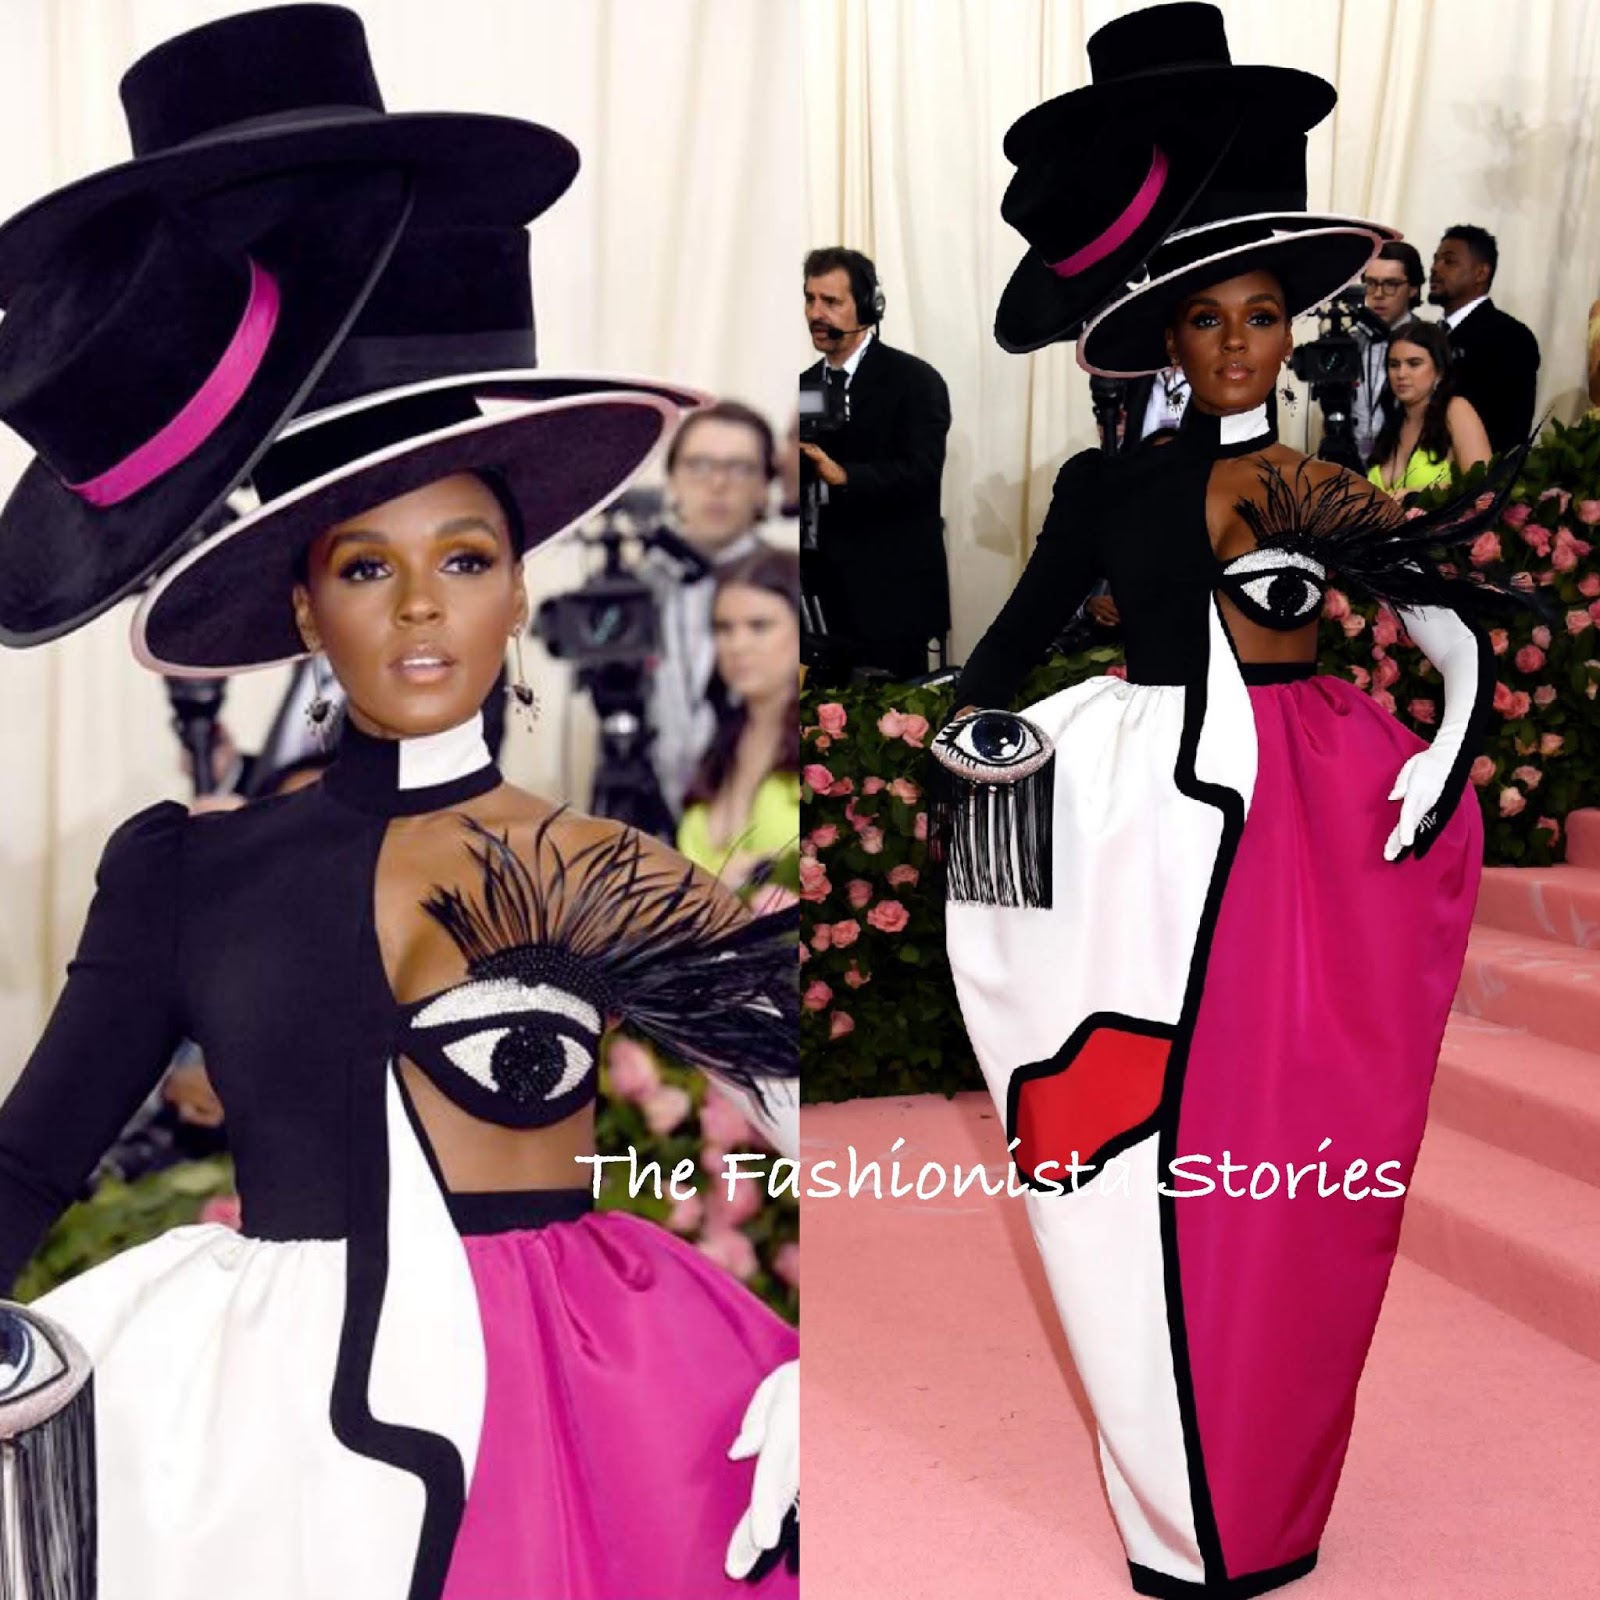 Janelle Monae & Laverne Cox in Christian Siriano at the 2019 MET Gala ...